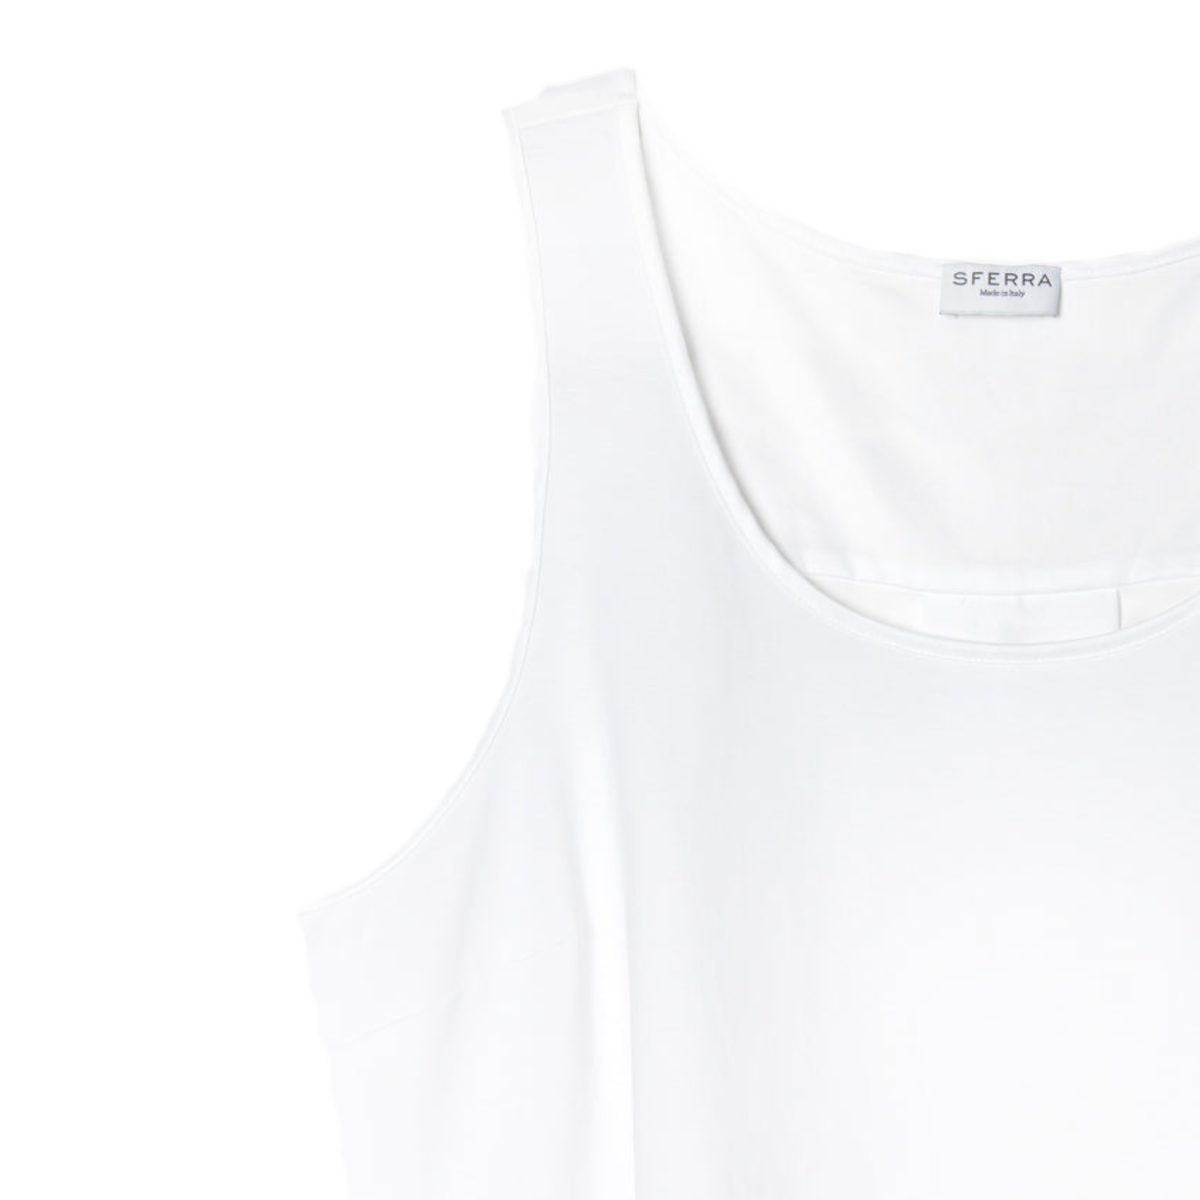 Corner View of White Sferra Caricia Swing Tank Top against a white background